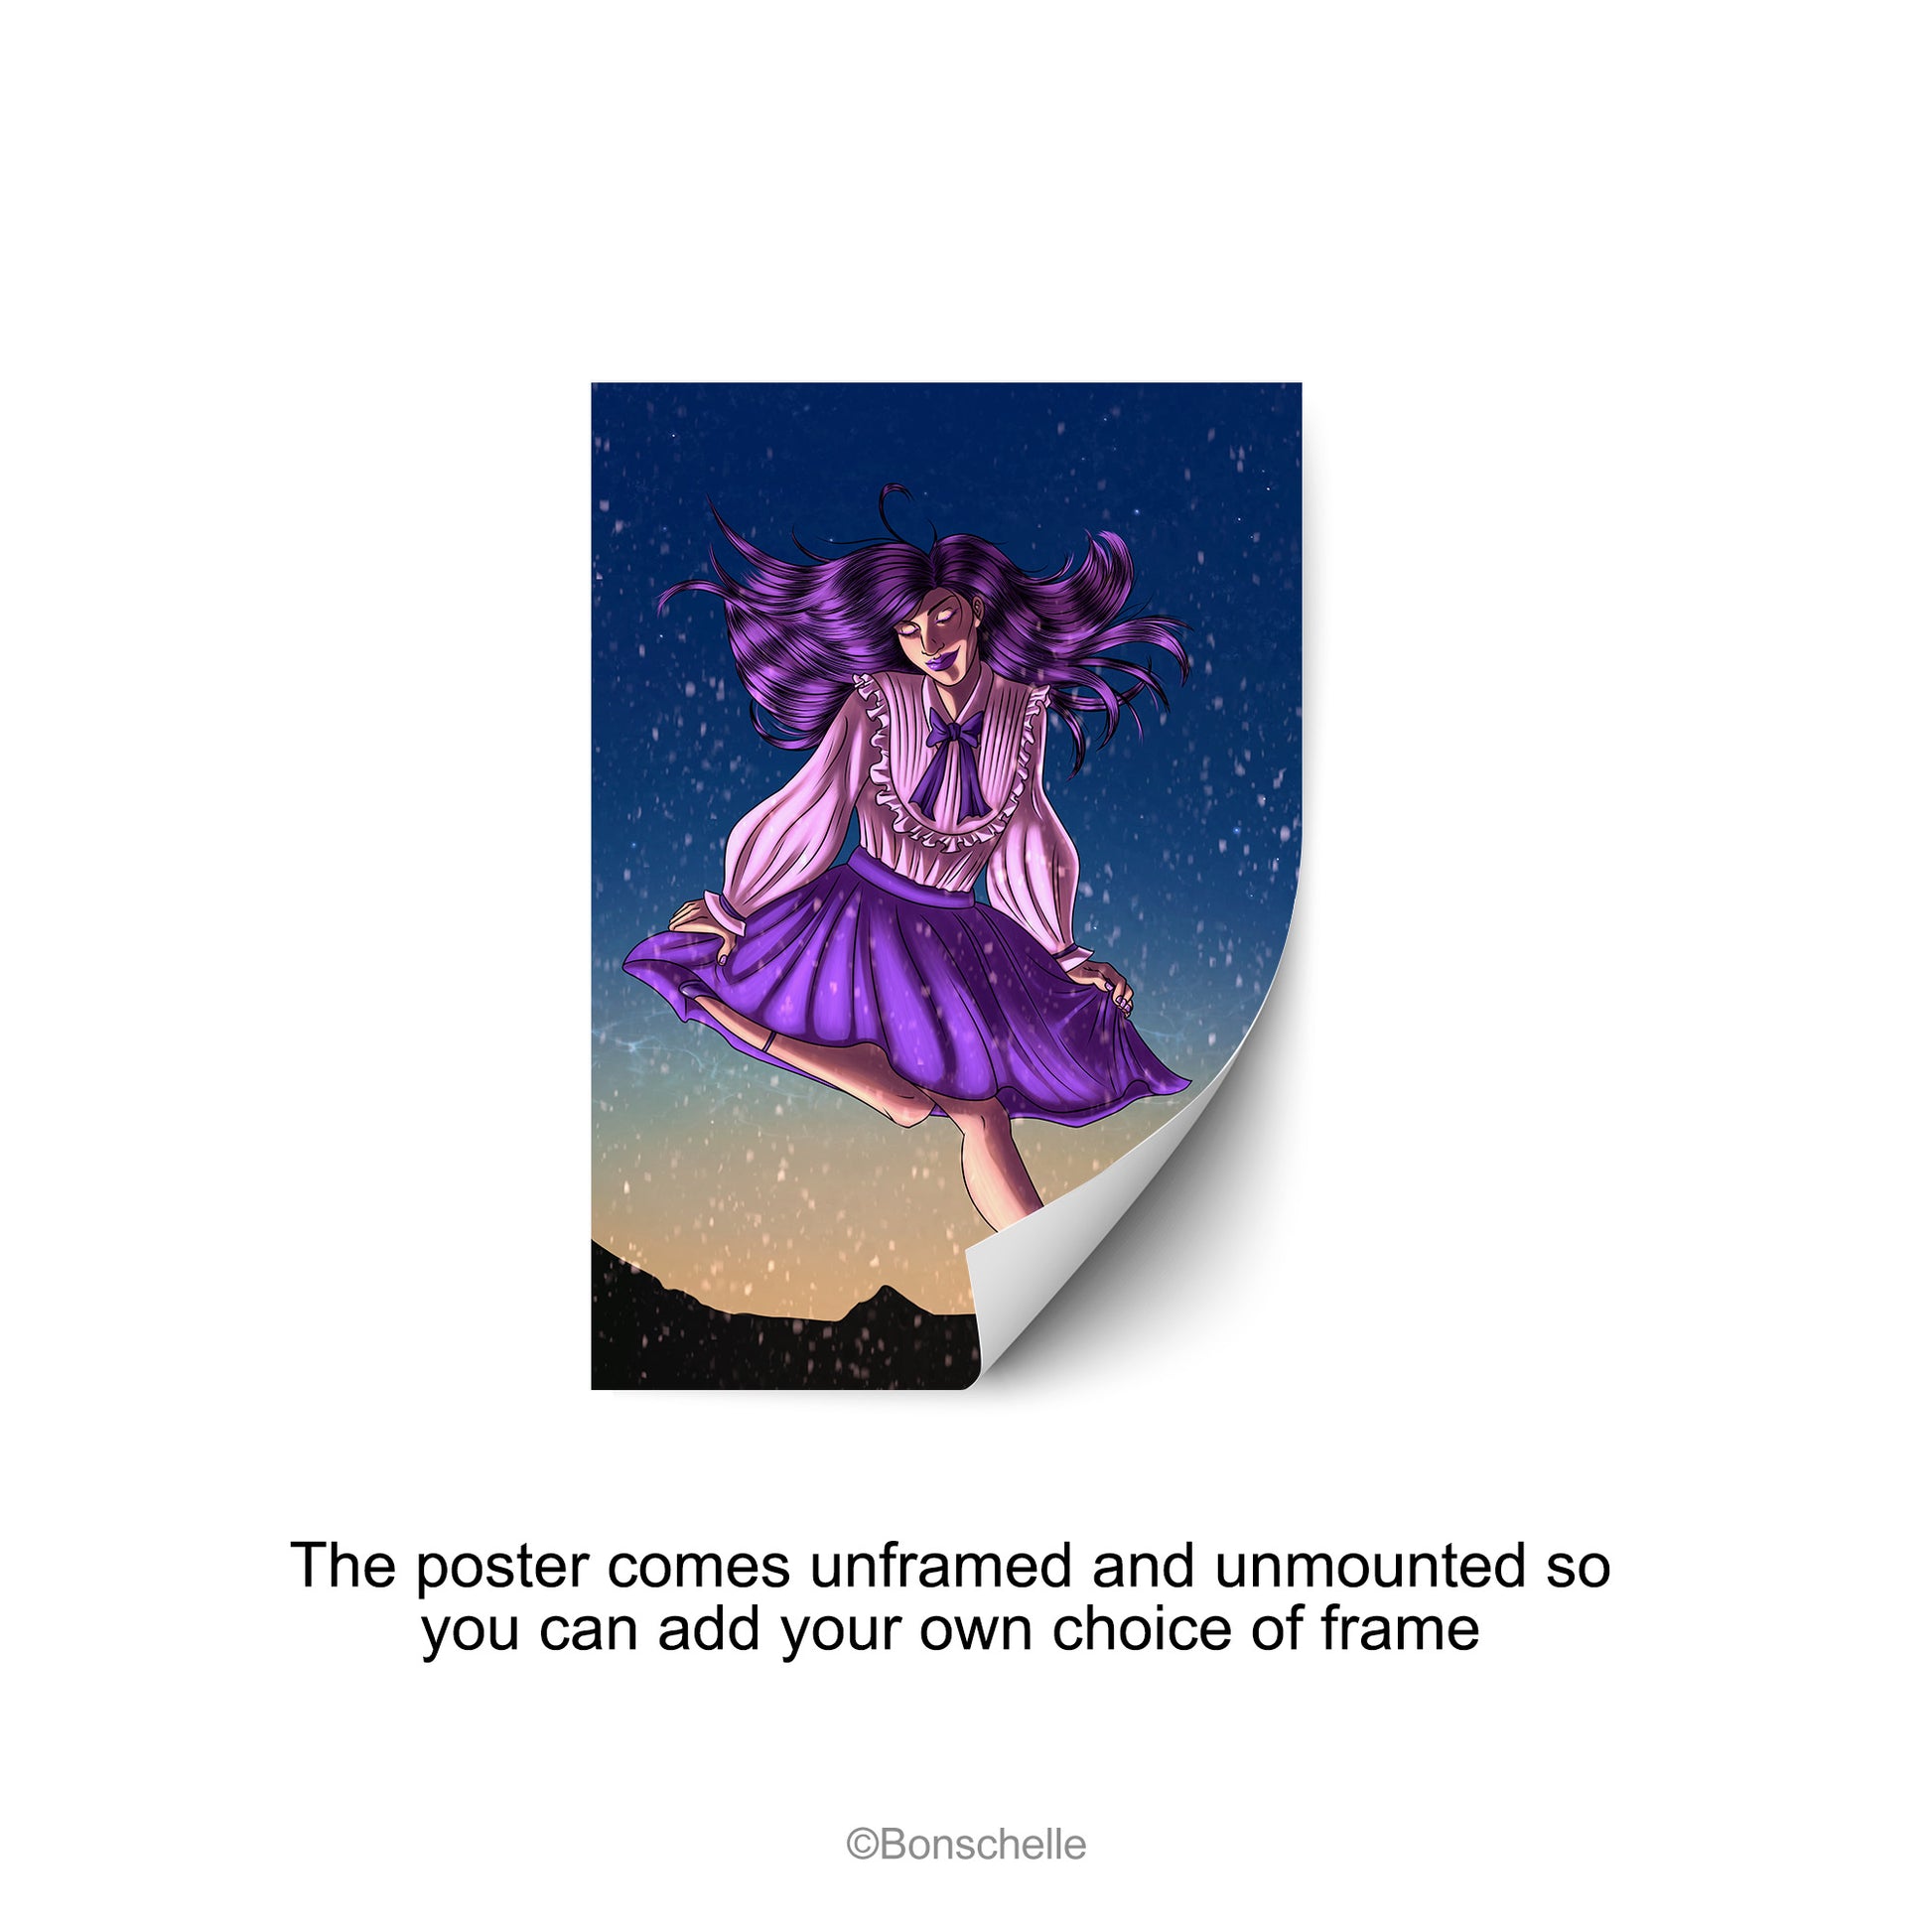 An original art print featuring a young girl in Lolita fashion dancing happily in the snow against an evening sky. The poster is unframed.